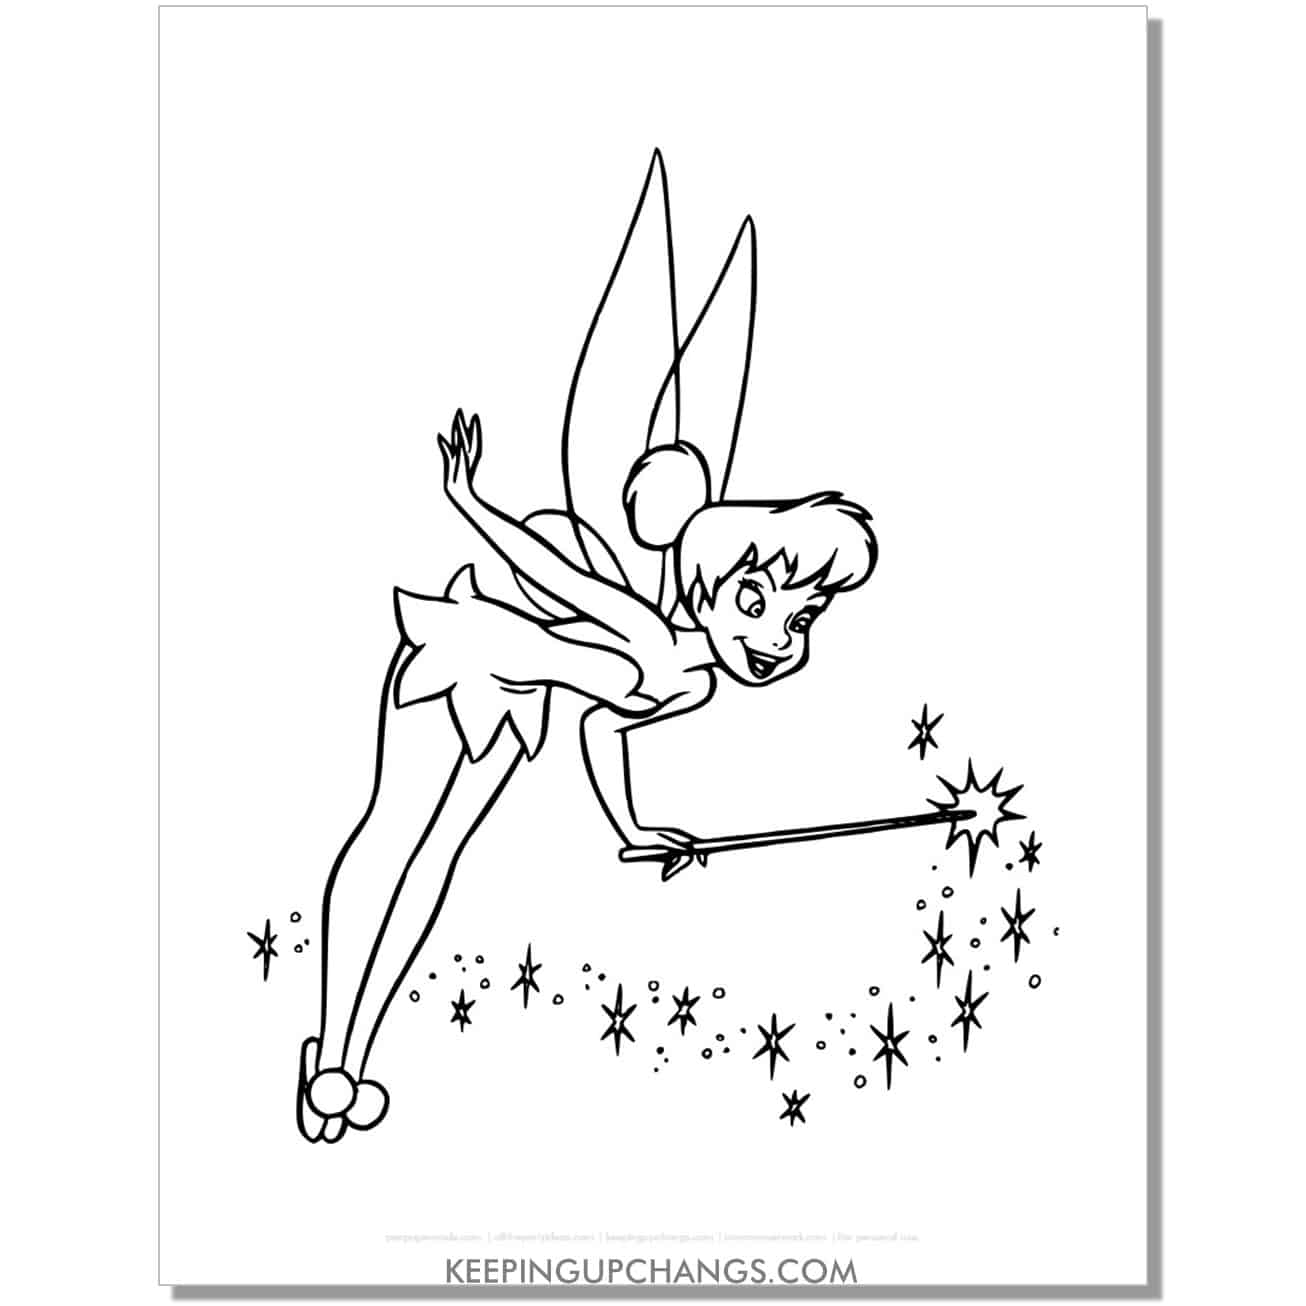 tinkerbell with fairy wand waving pixie dust coloring page, sheet.